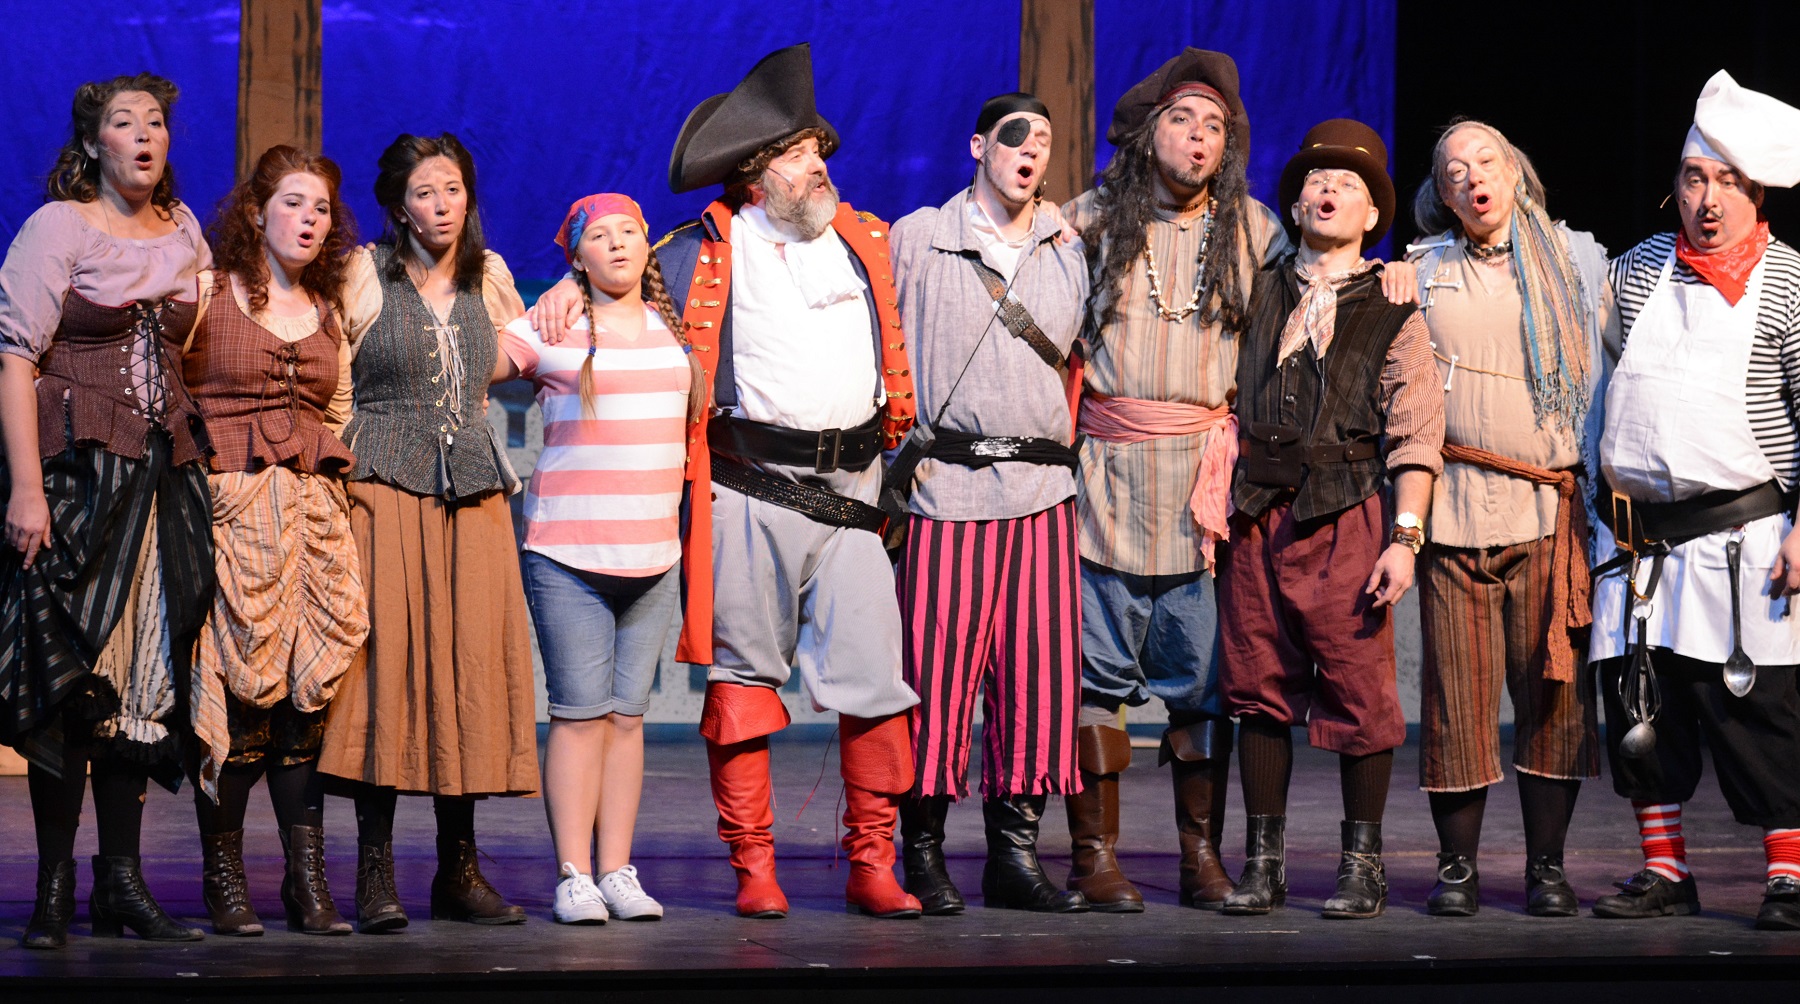 Fun-filled kids’ musical ‘How I Became a Pirate’ comes to the Croswell